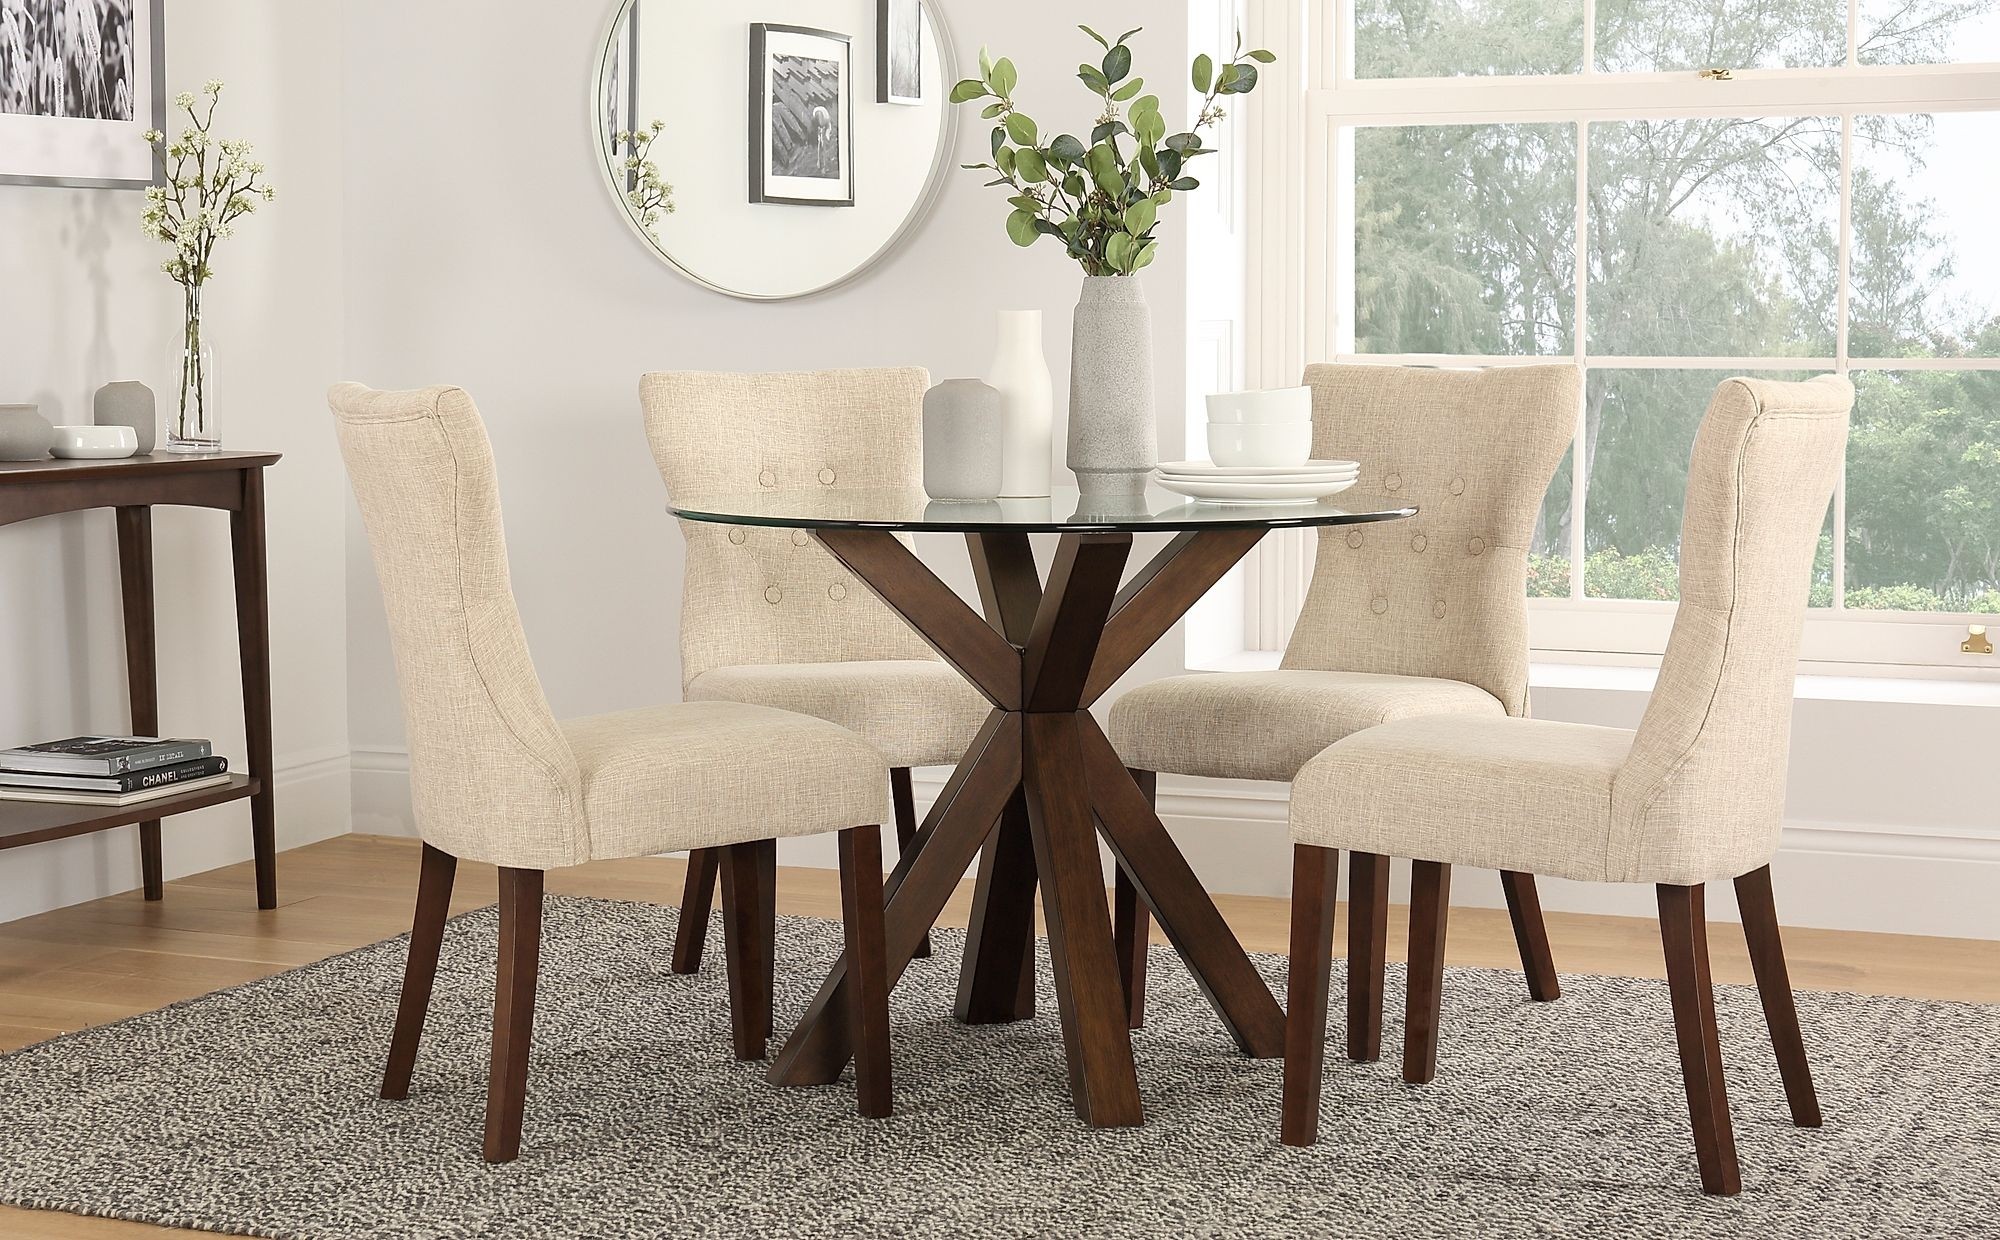 Hatton round dark wood and glass dining table with 4